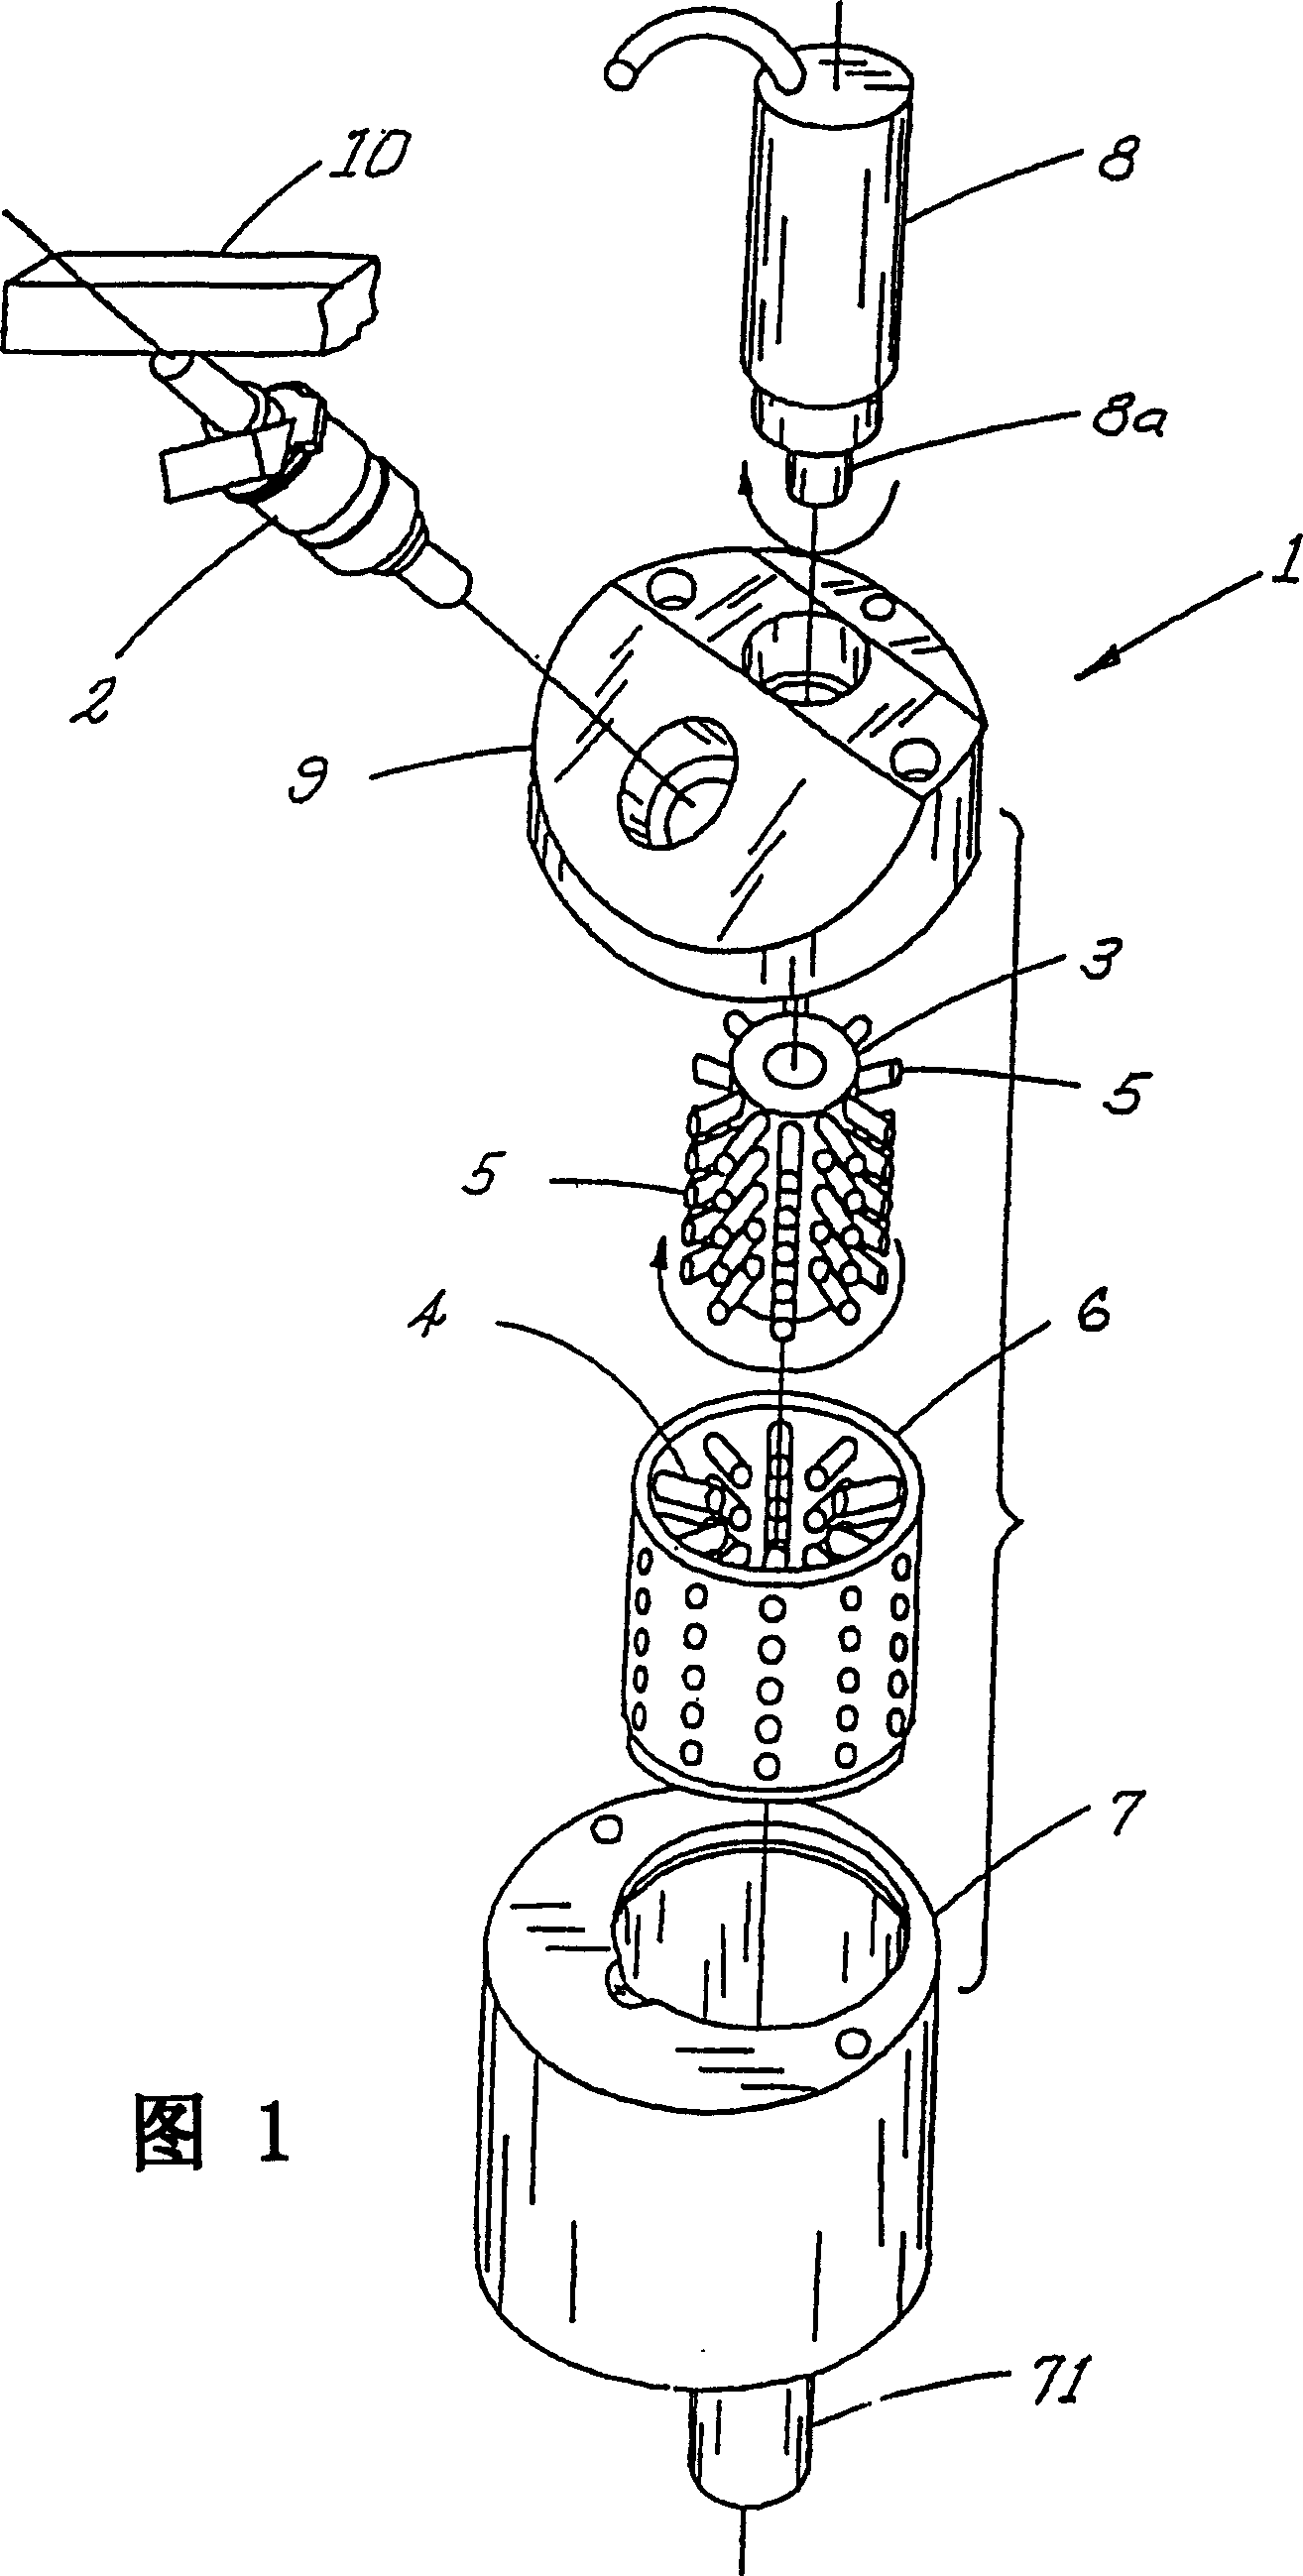 Mechanical fuel gasification apparatus